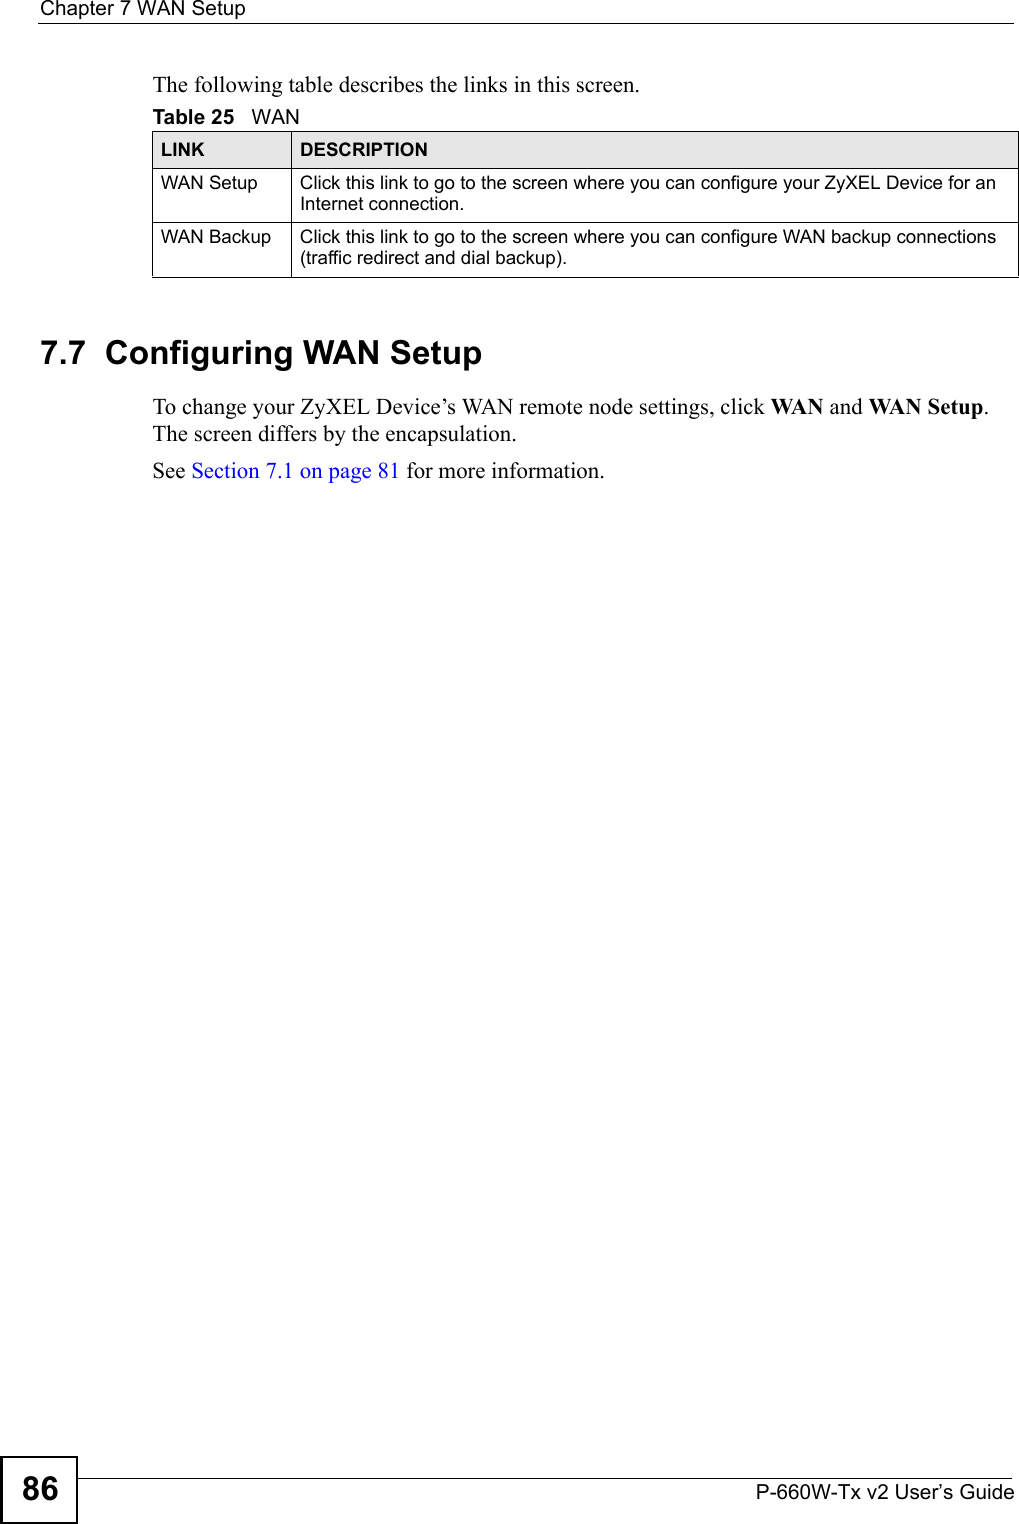 Chapter 7 WAN SetupP-660W-Tx v2 User’s Guide86The following table describes the links in this screen. 7.7  Configuring WAN Setup To change your ZyXEL Device’s WAN remote node settings, click WA N  and WA N S et up . The screen differs by the encapsulation. See Section 7.1 on page 81 for more information. Table 25   WANLINK DESCRIPTIONWAN Setup Click this link to go to the screen where you can configure your ZyXEL Device for an Internet connection. WAN Backup Click this link to go to the screen where you can configure WAN backup connections (traffic redirect and dial backup).